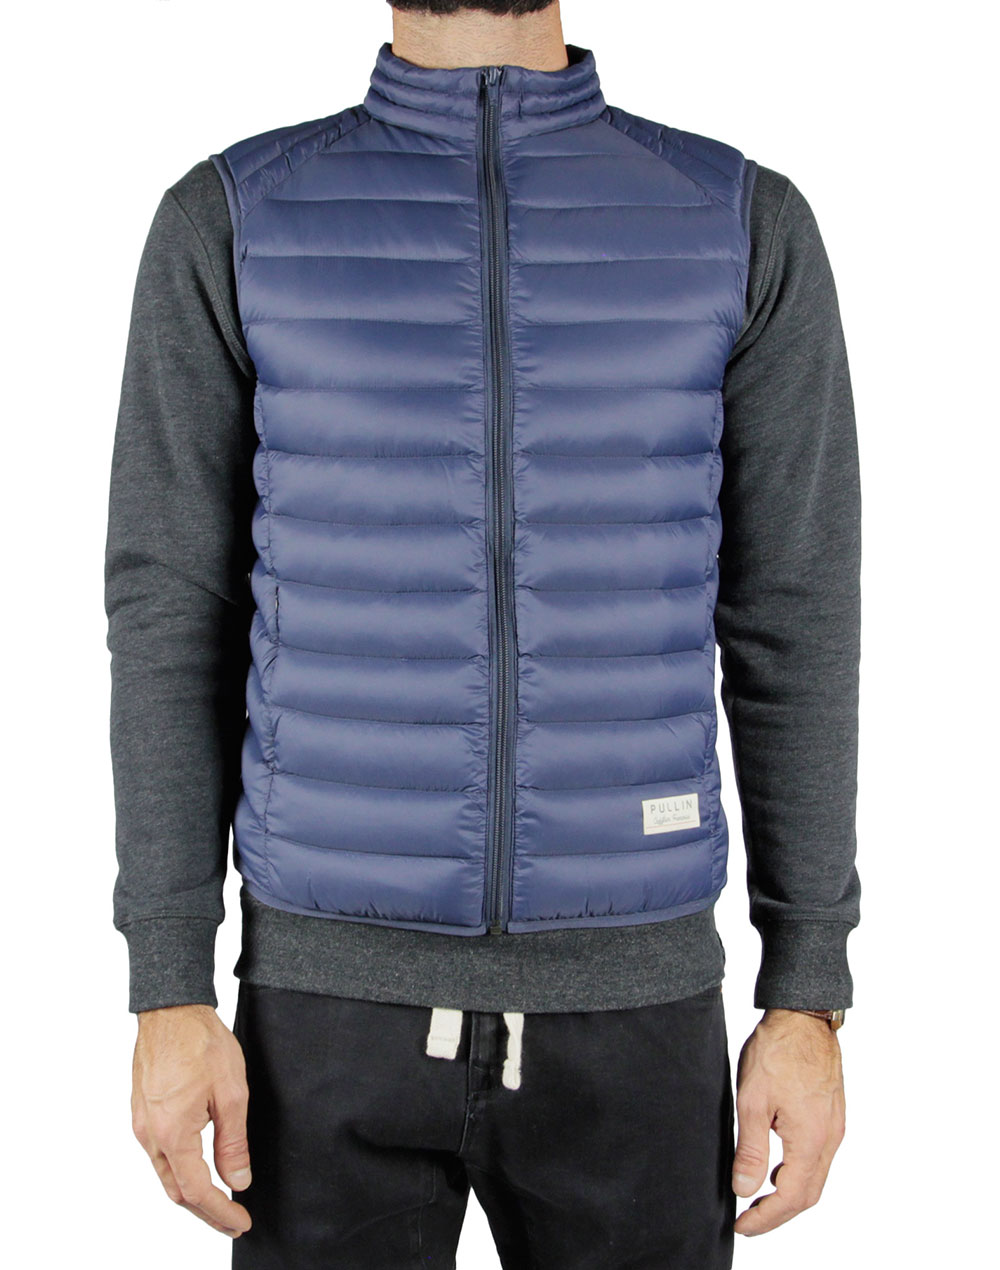 Men's feather jacket without sleeves FREEZE2